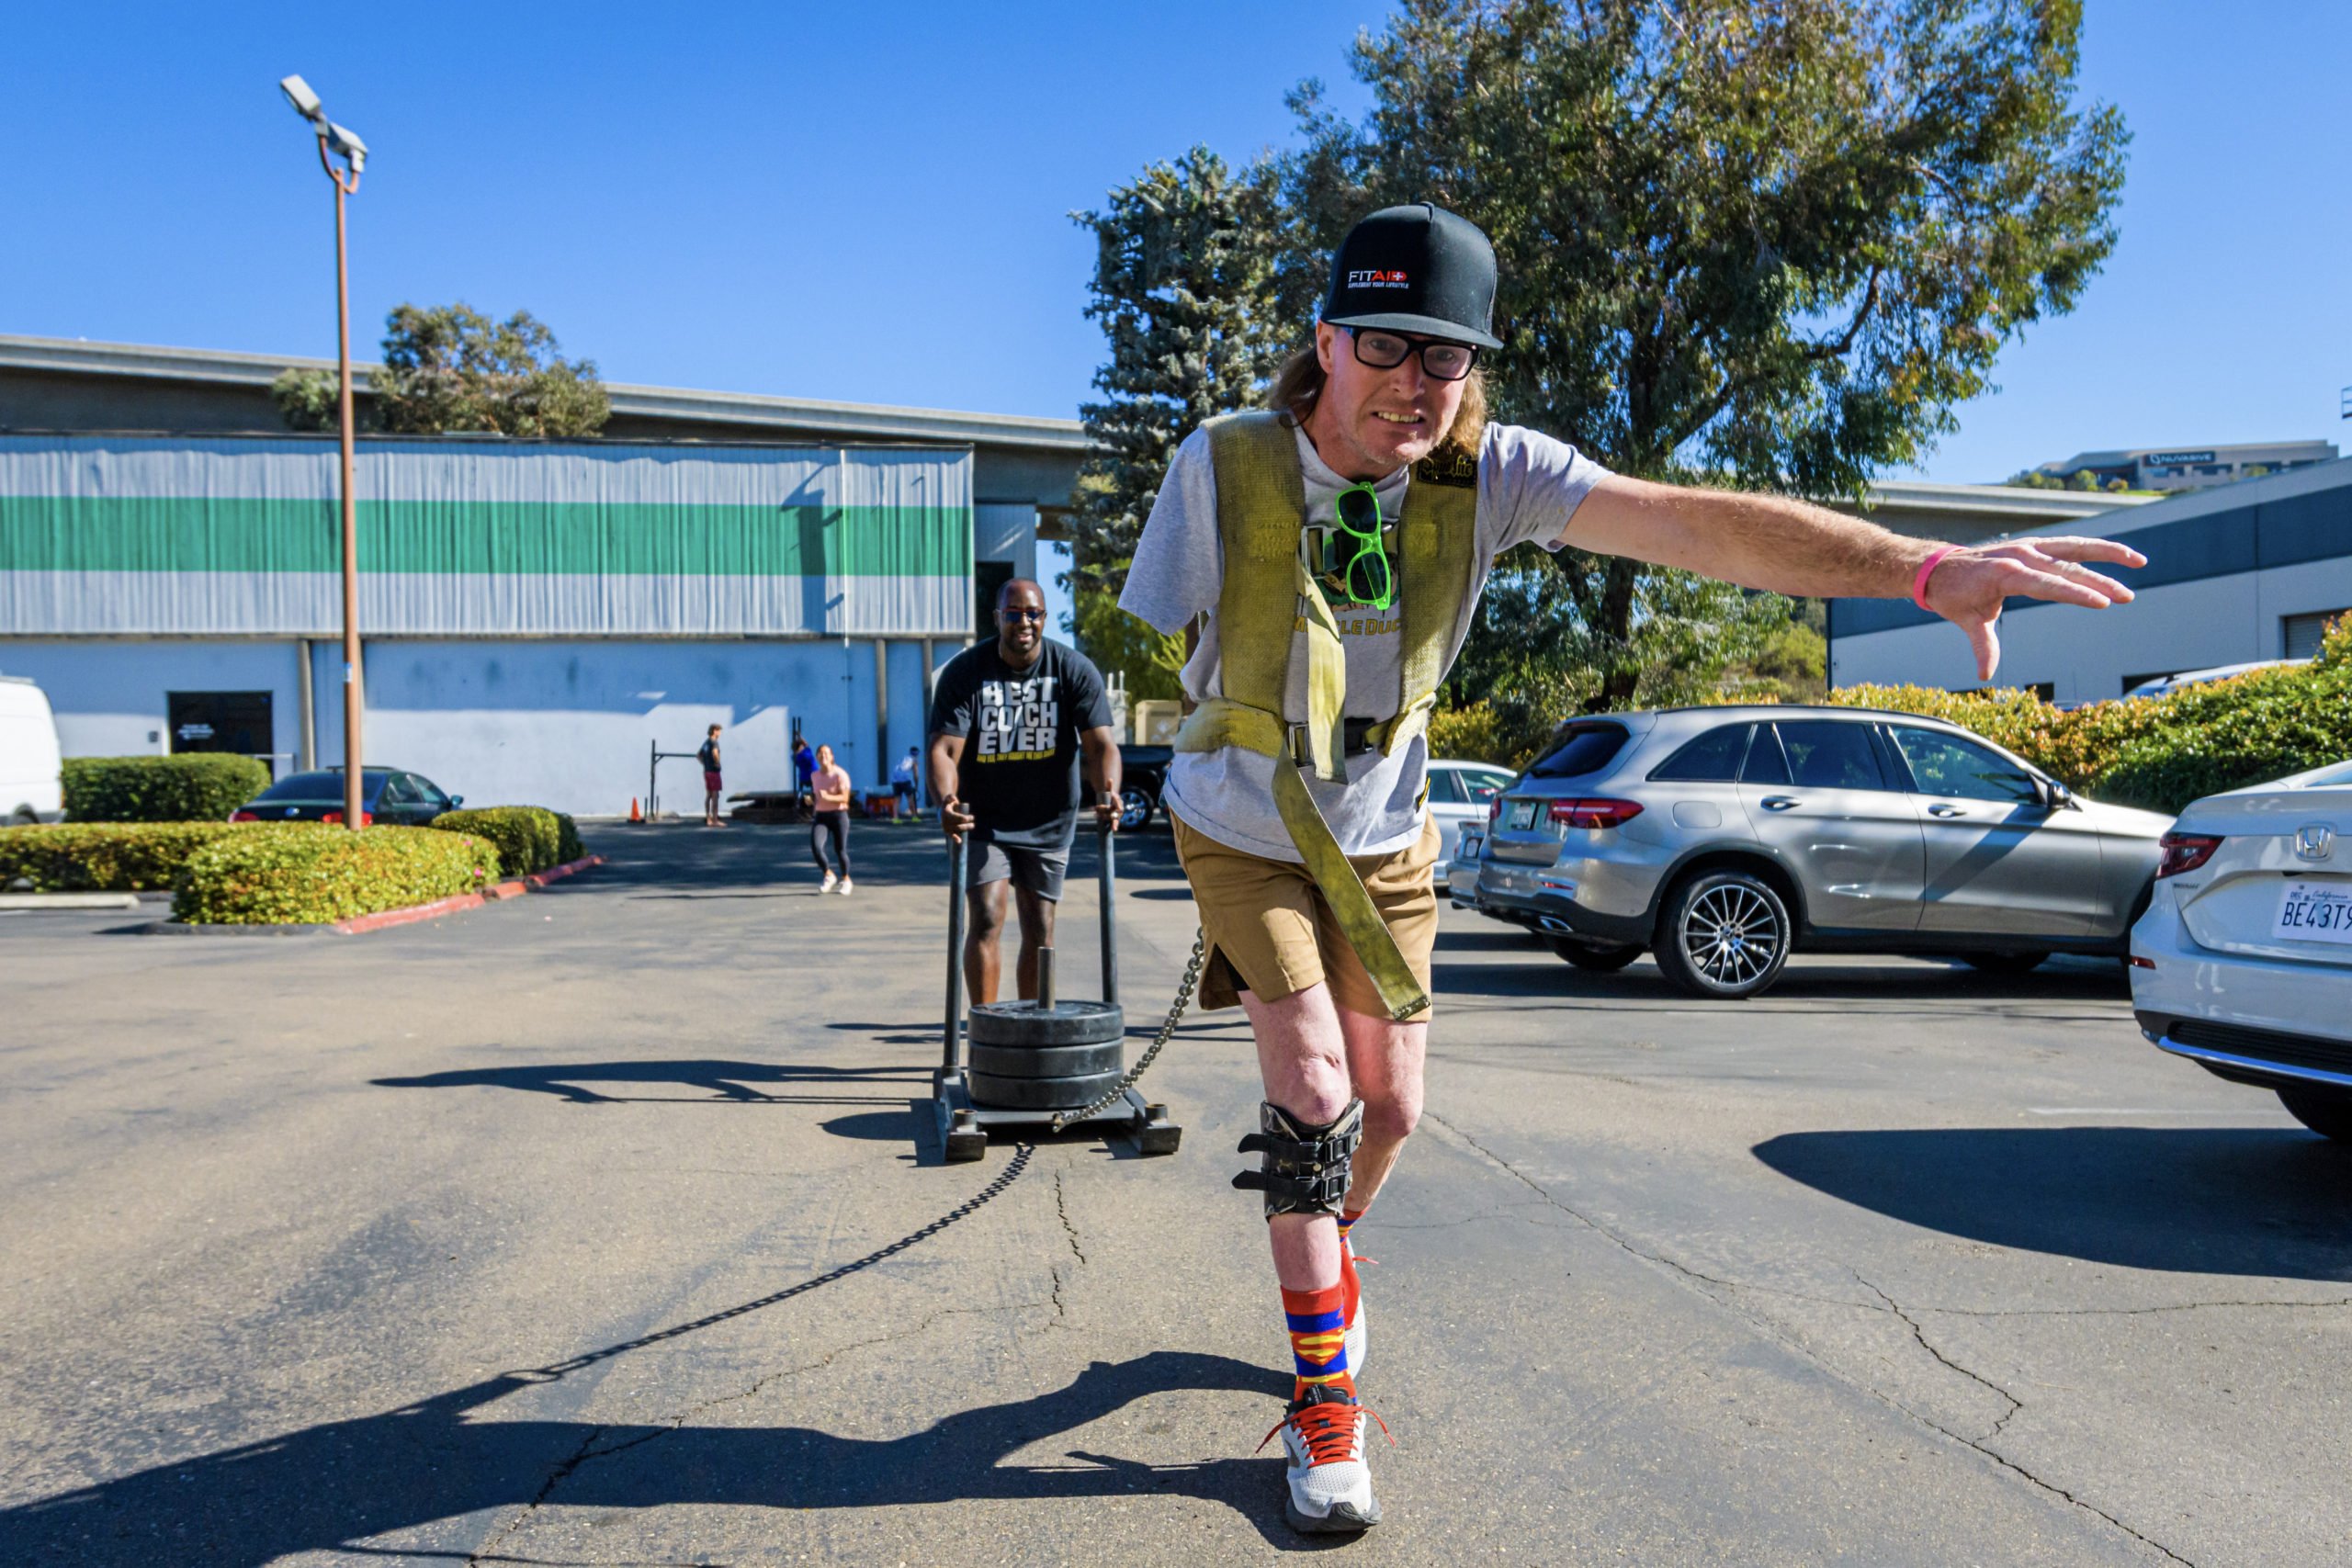 Forge attendee Shane, with a determined face, pulls a weighted sled as arm amputee through the parking lot to complete the workout.